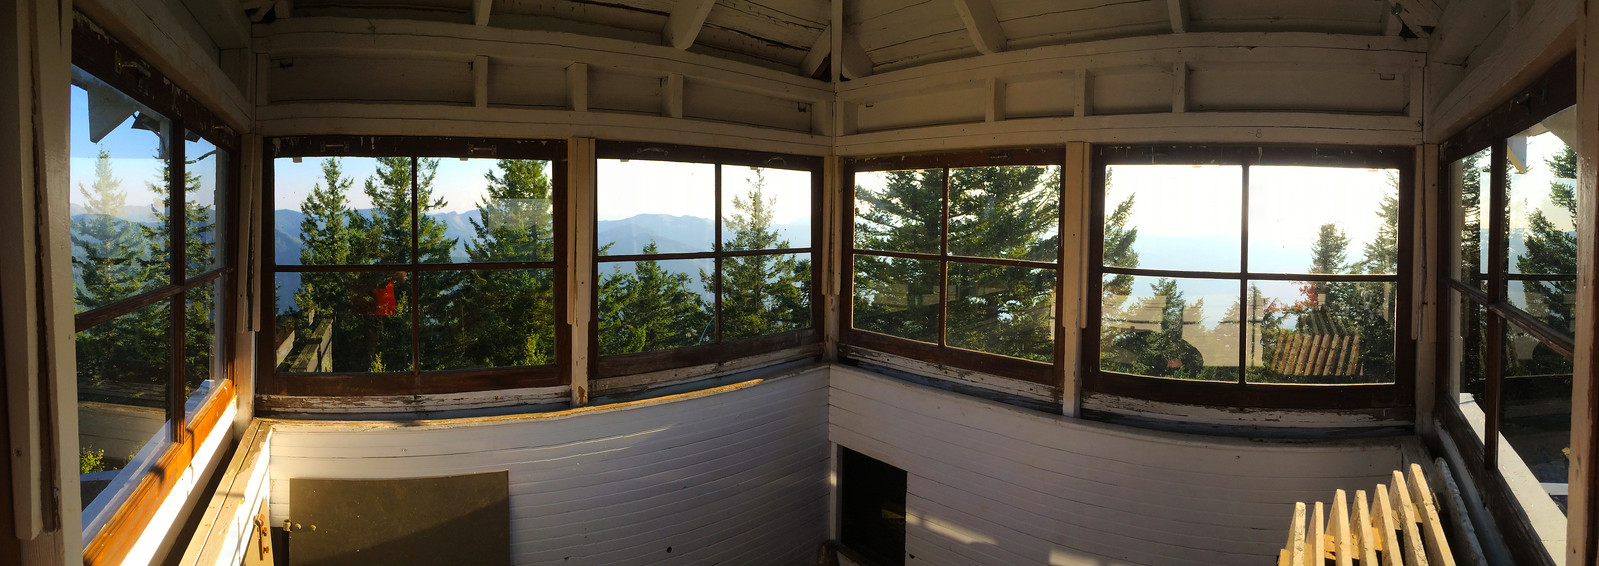 View of the interior of the Pechuck Lookout.